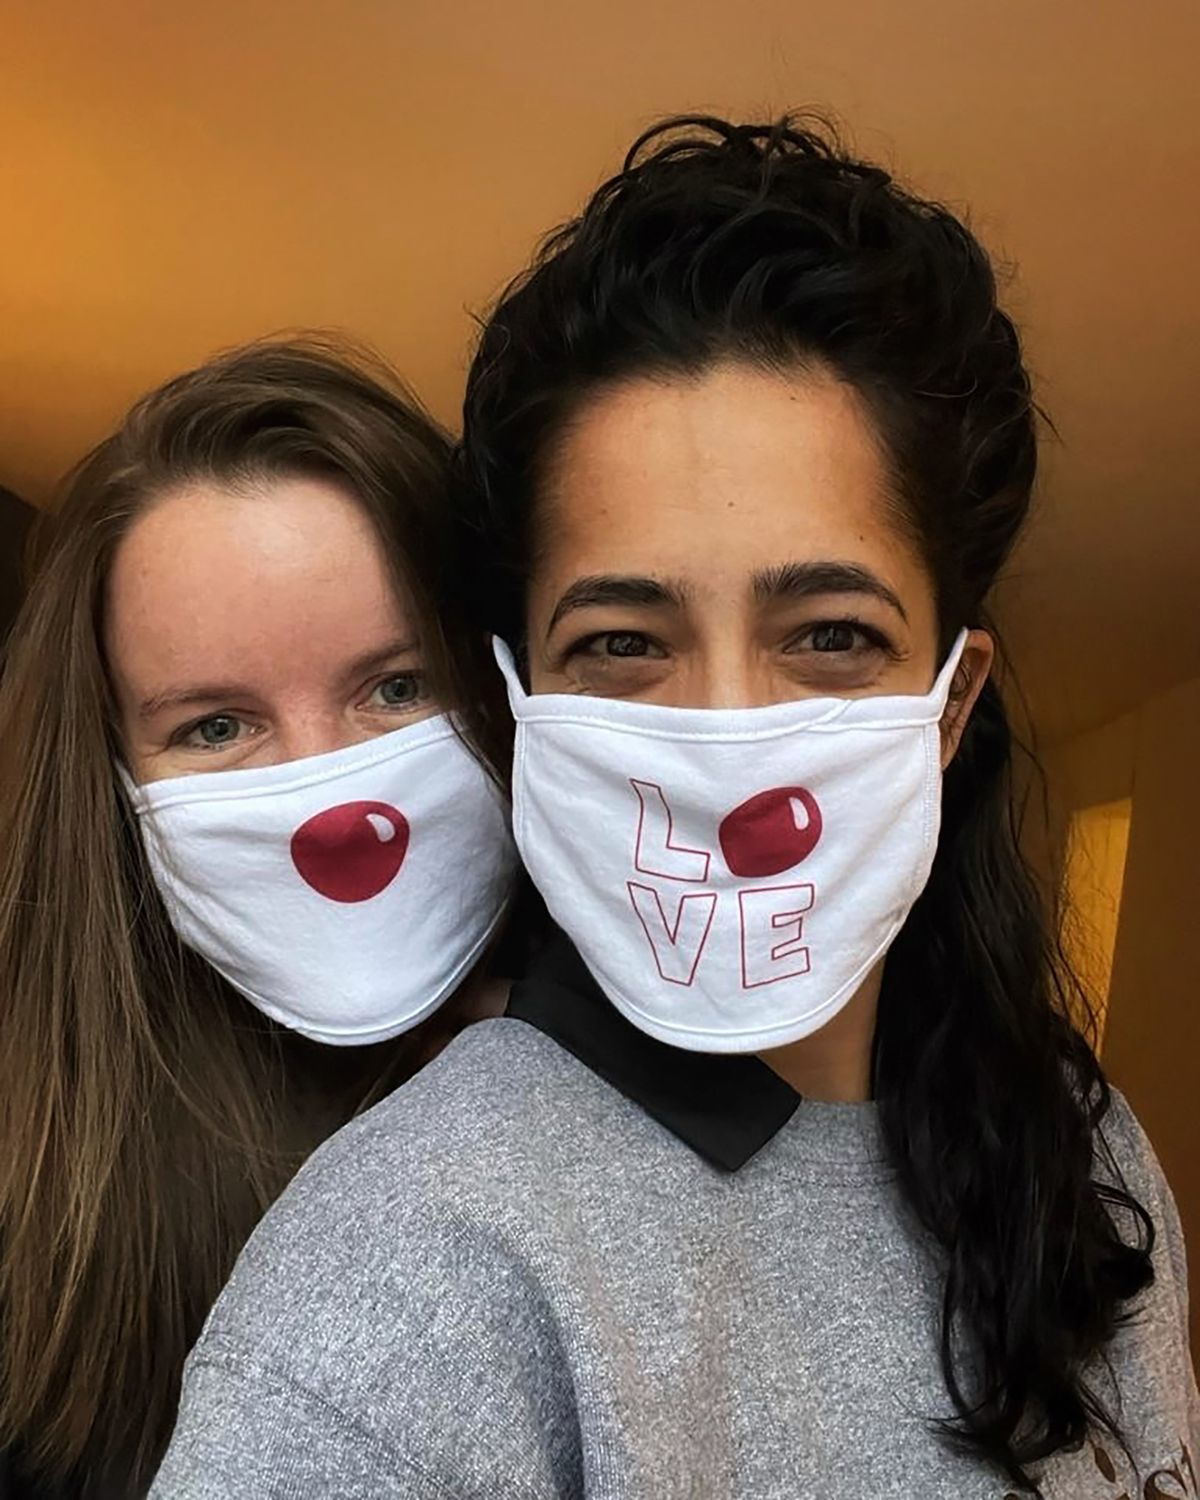 Walgreens employees will wear special Red Nose Day masks for the 2021 fundraising campaign.  (HONS)